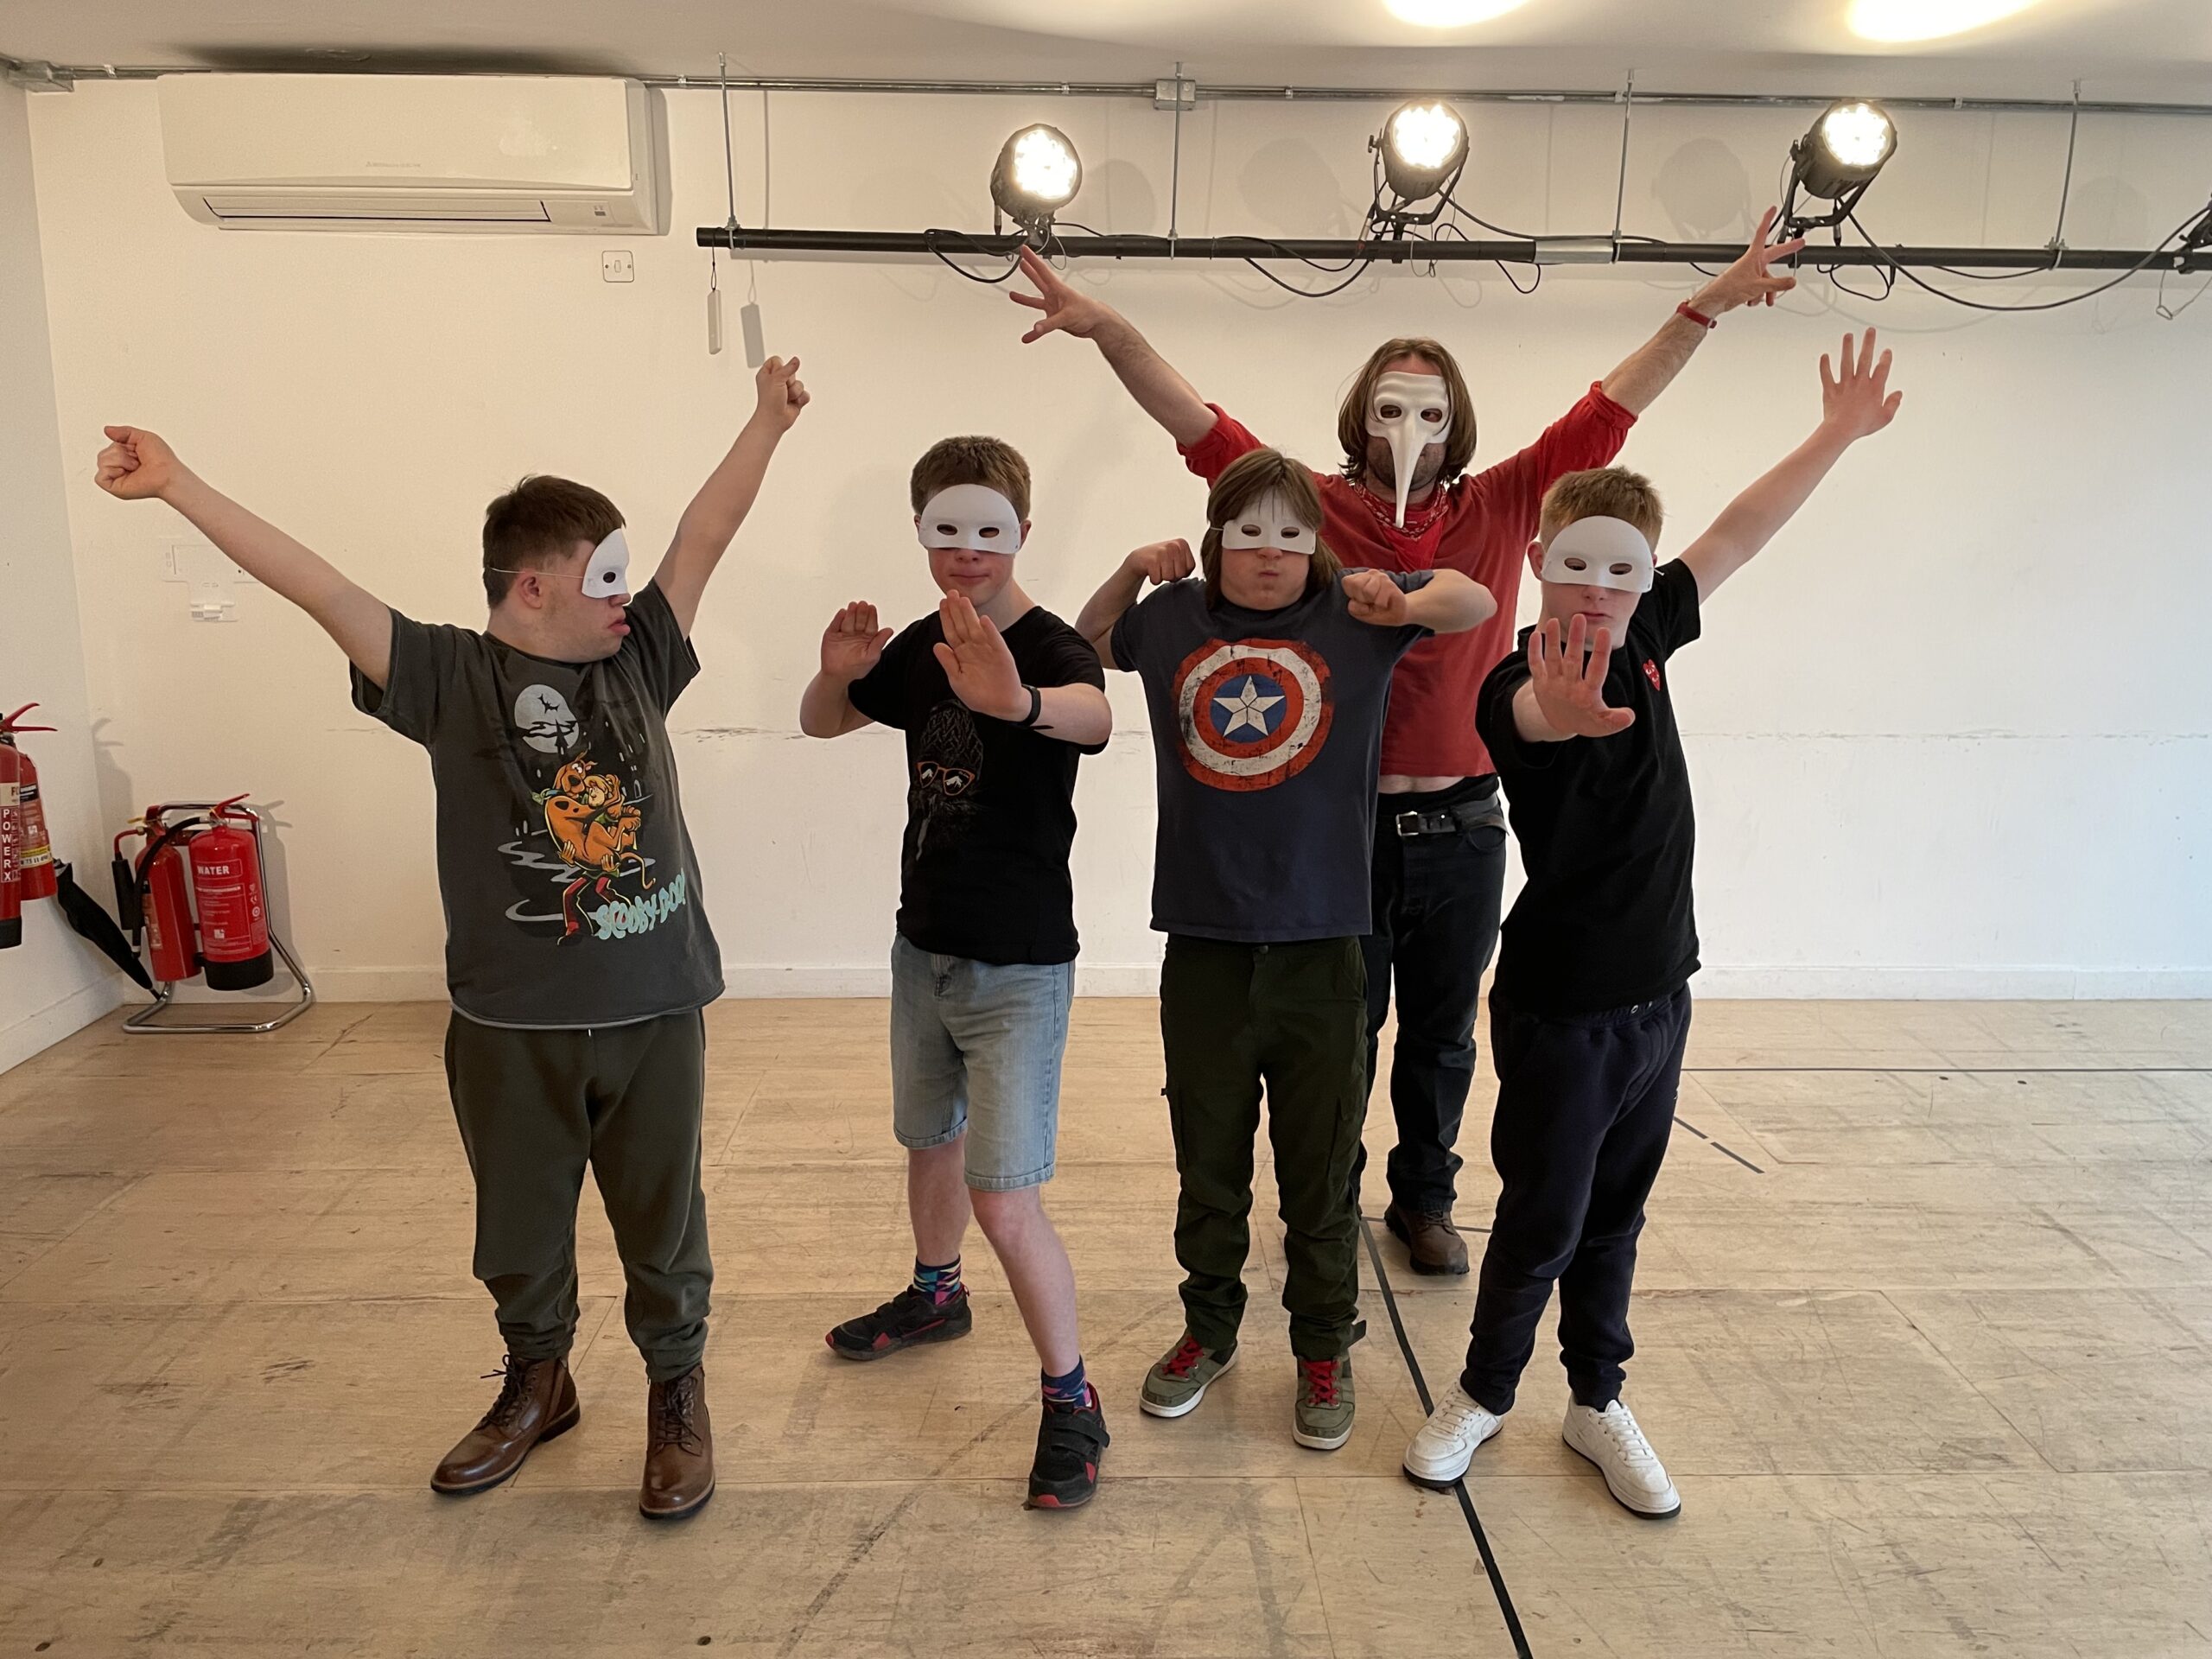 Ethan with a group of young actors, wearing masks, with their arms in the air.